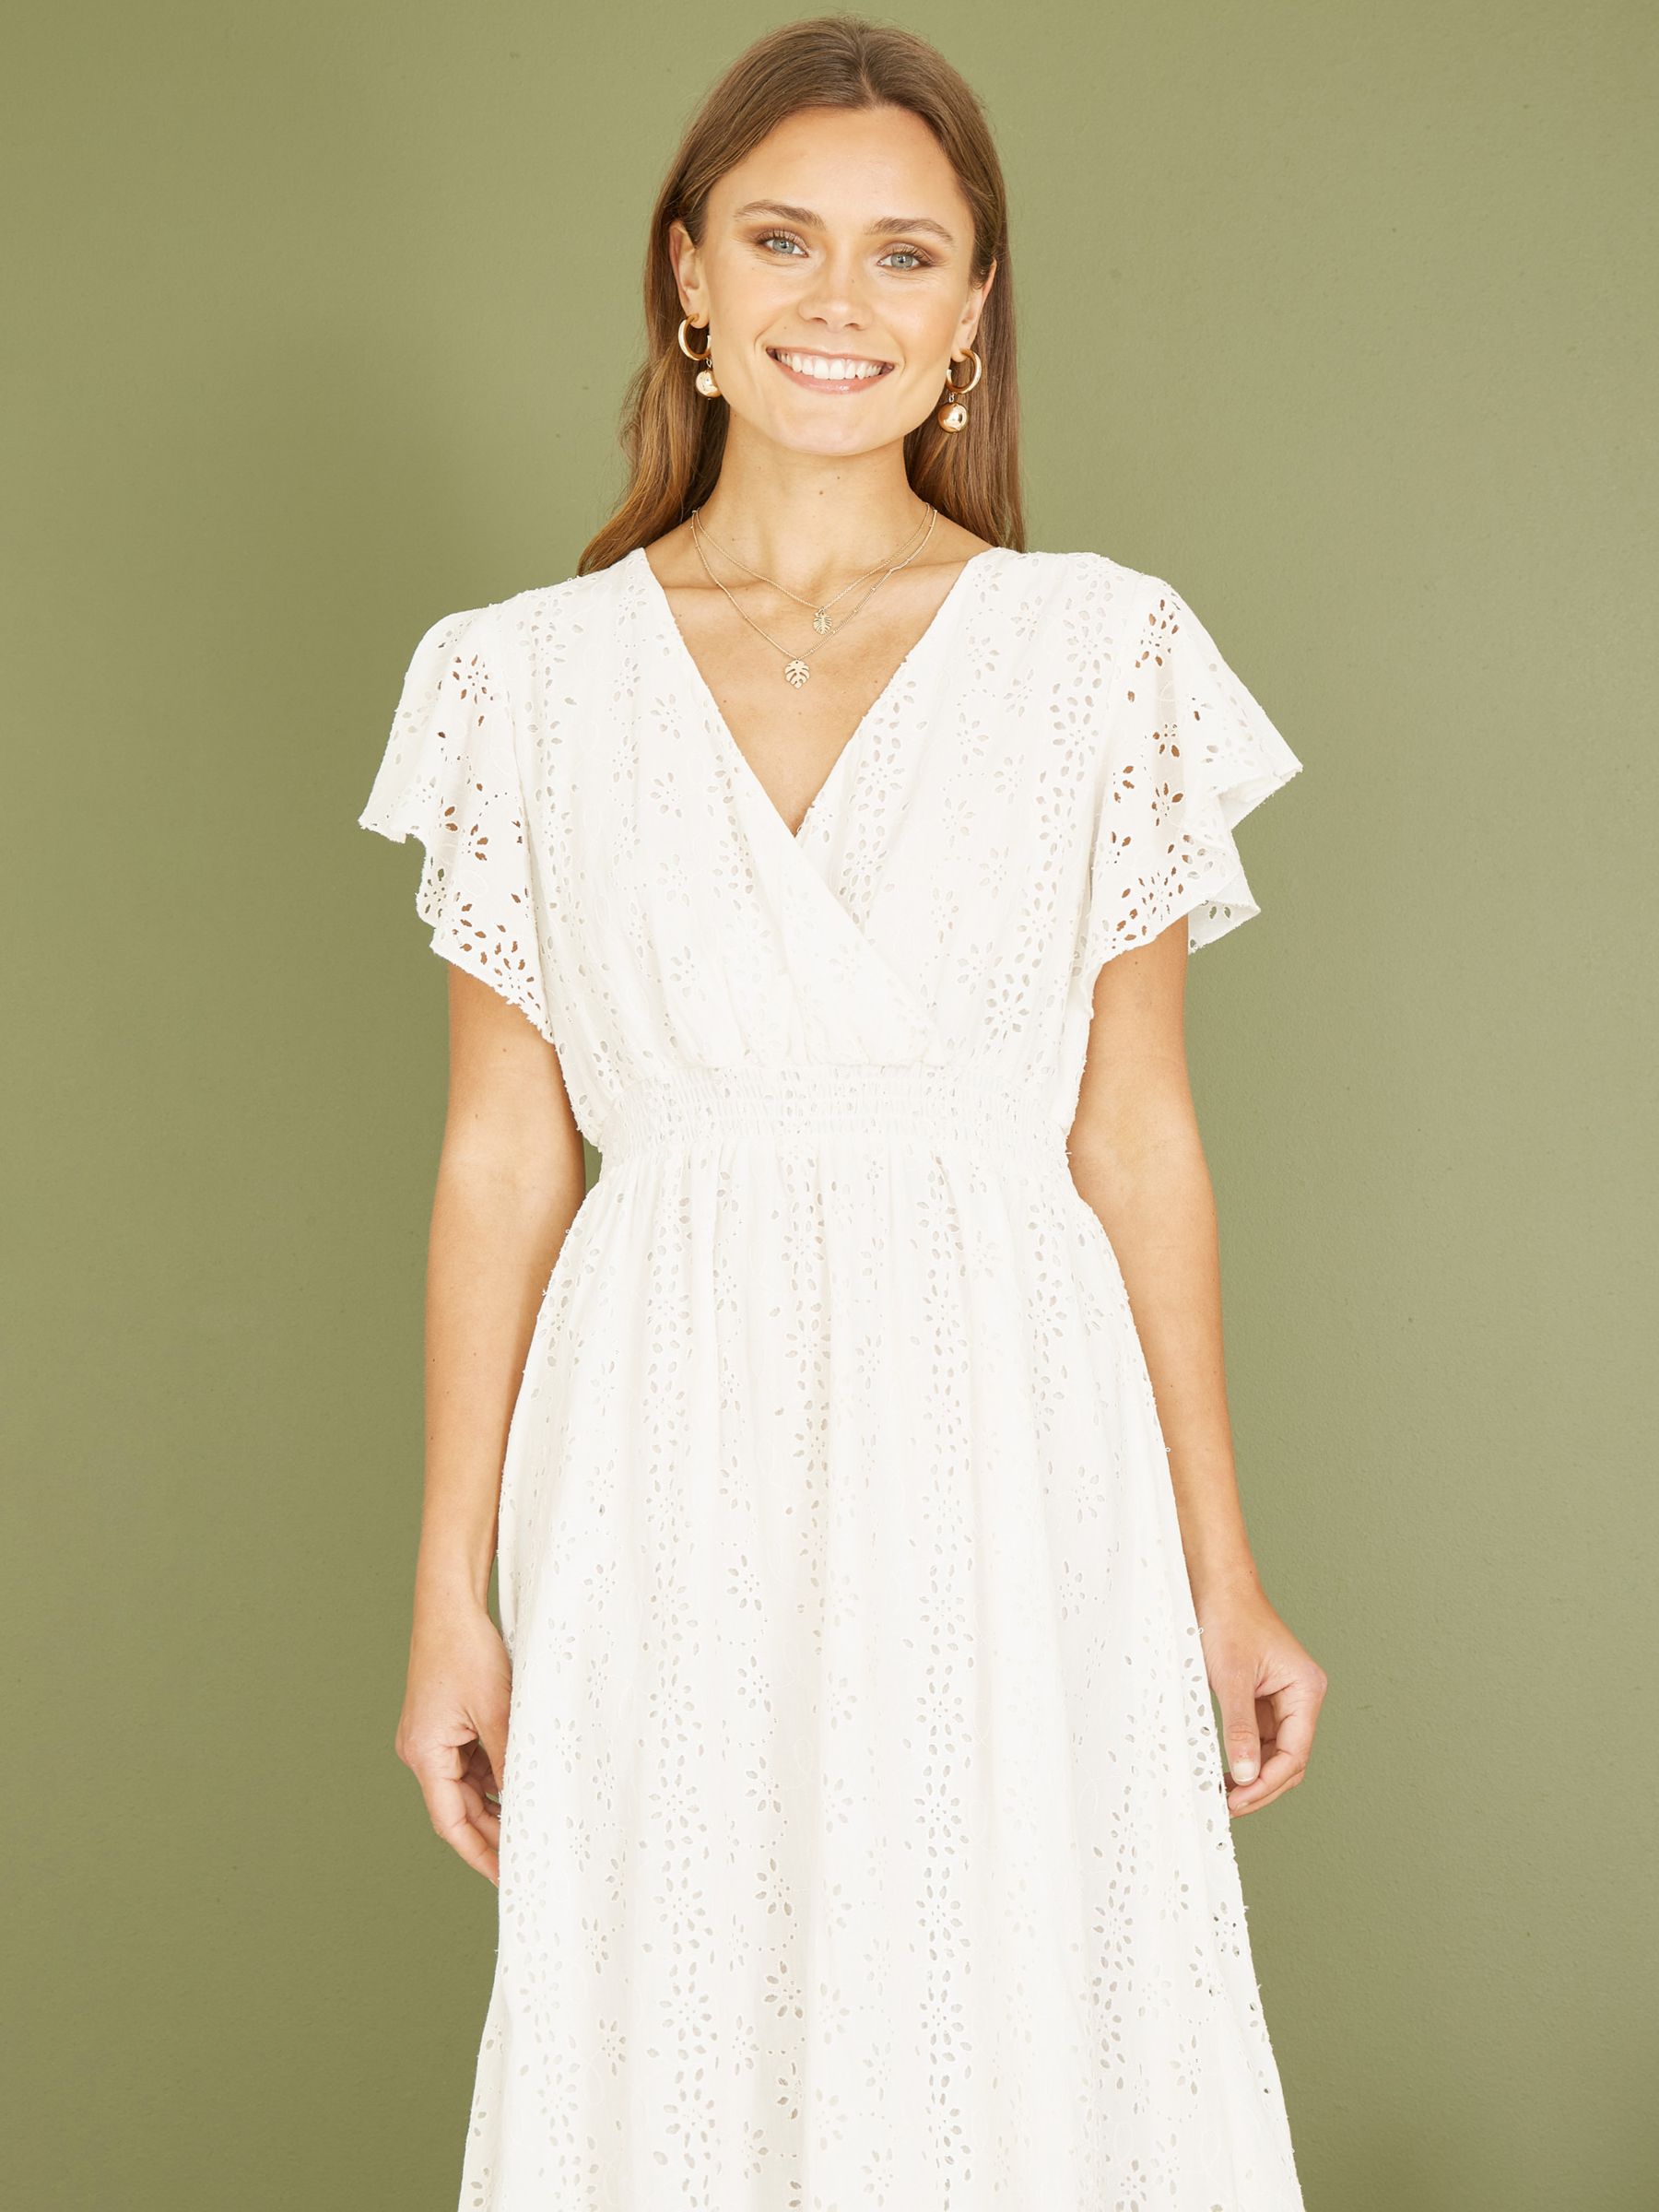 Buy Yumi Broderie Anglaise Wrap Midi Dress, White Online at johnlewis.com